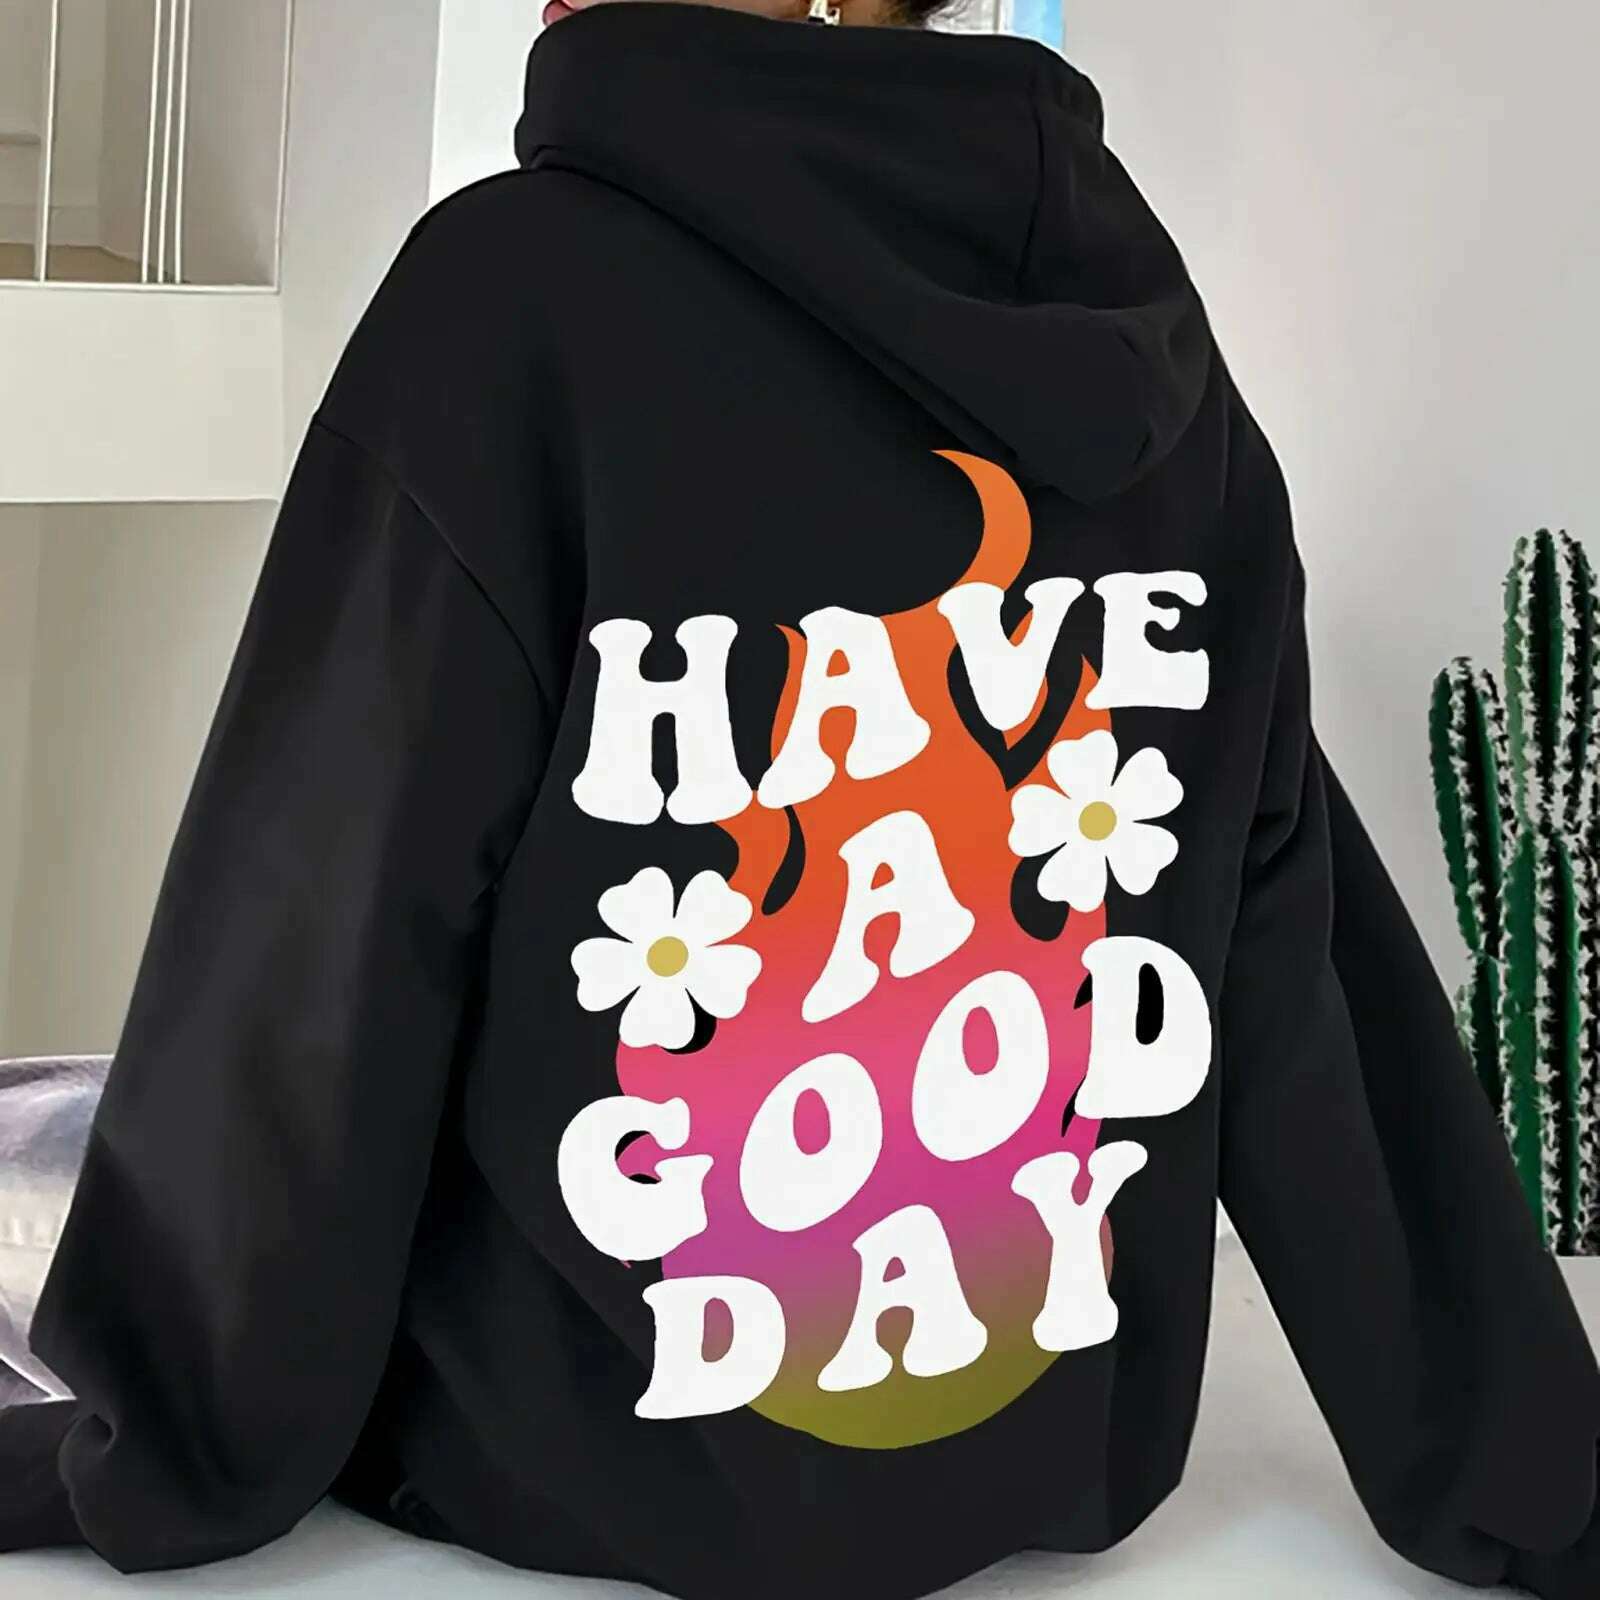 KIMLUD, Female Causal Hoodies Letter Print Design on Back for Outdoor Work Indoor Women Clothes Female Pullover Hoodies, KIMLUD Womens Clothes